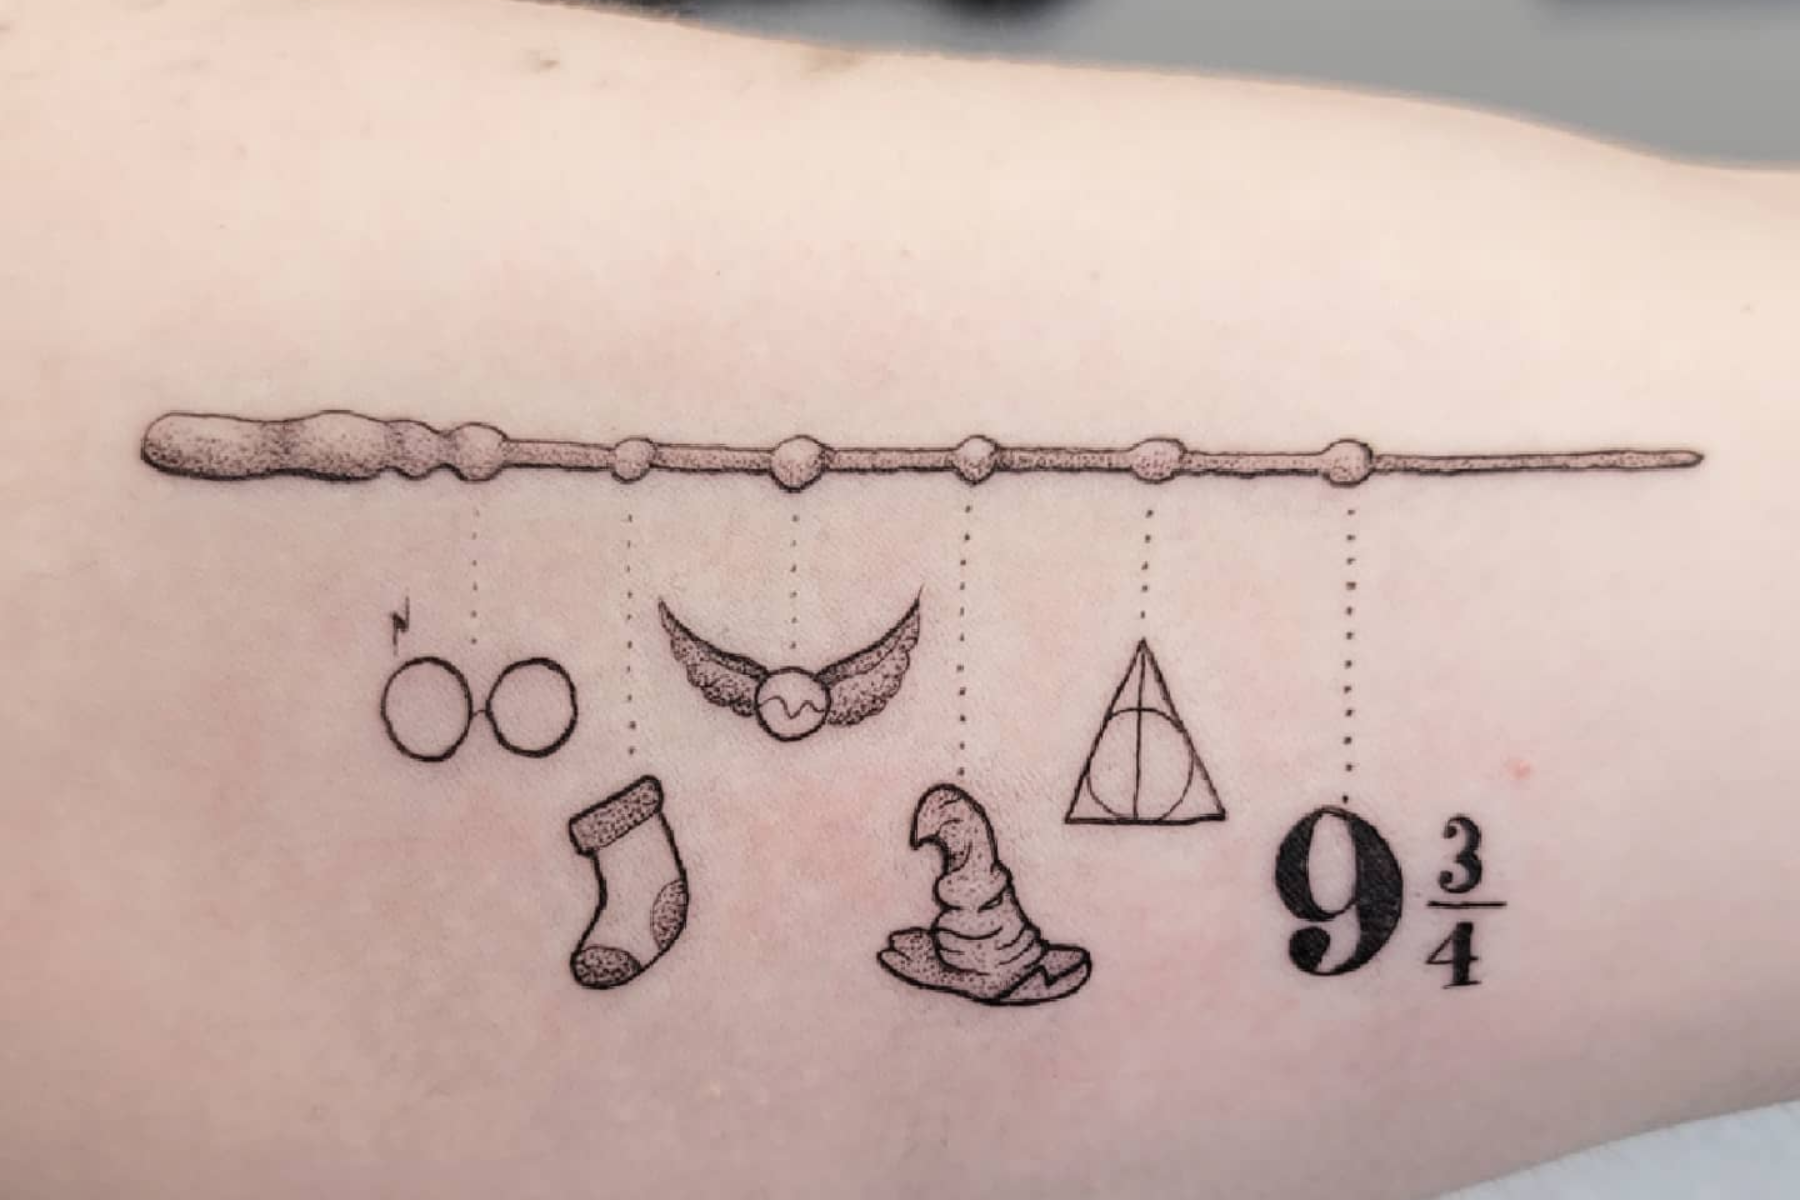 This website is full of harry potter tatoos | Harry potter tattoos, Tattoos,  Nerdy tattoos